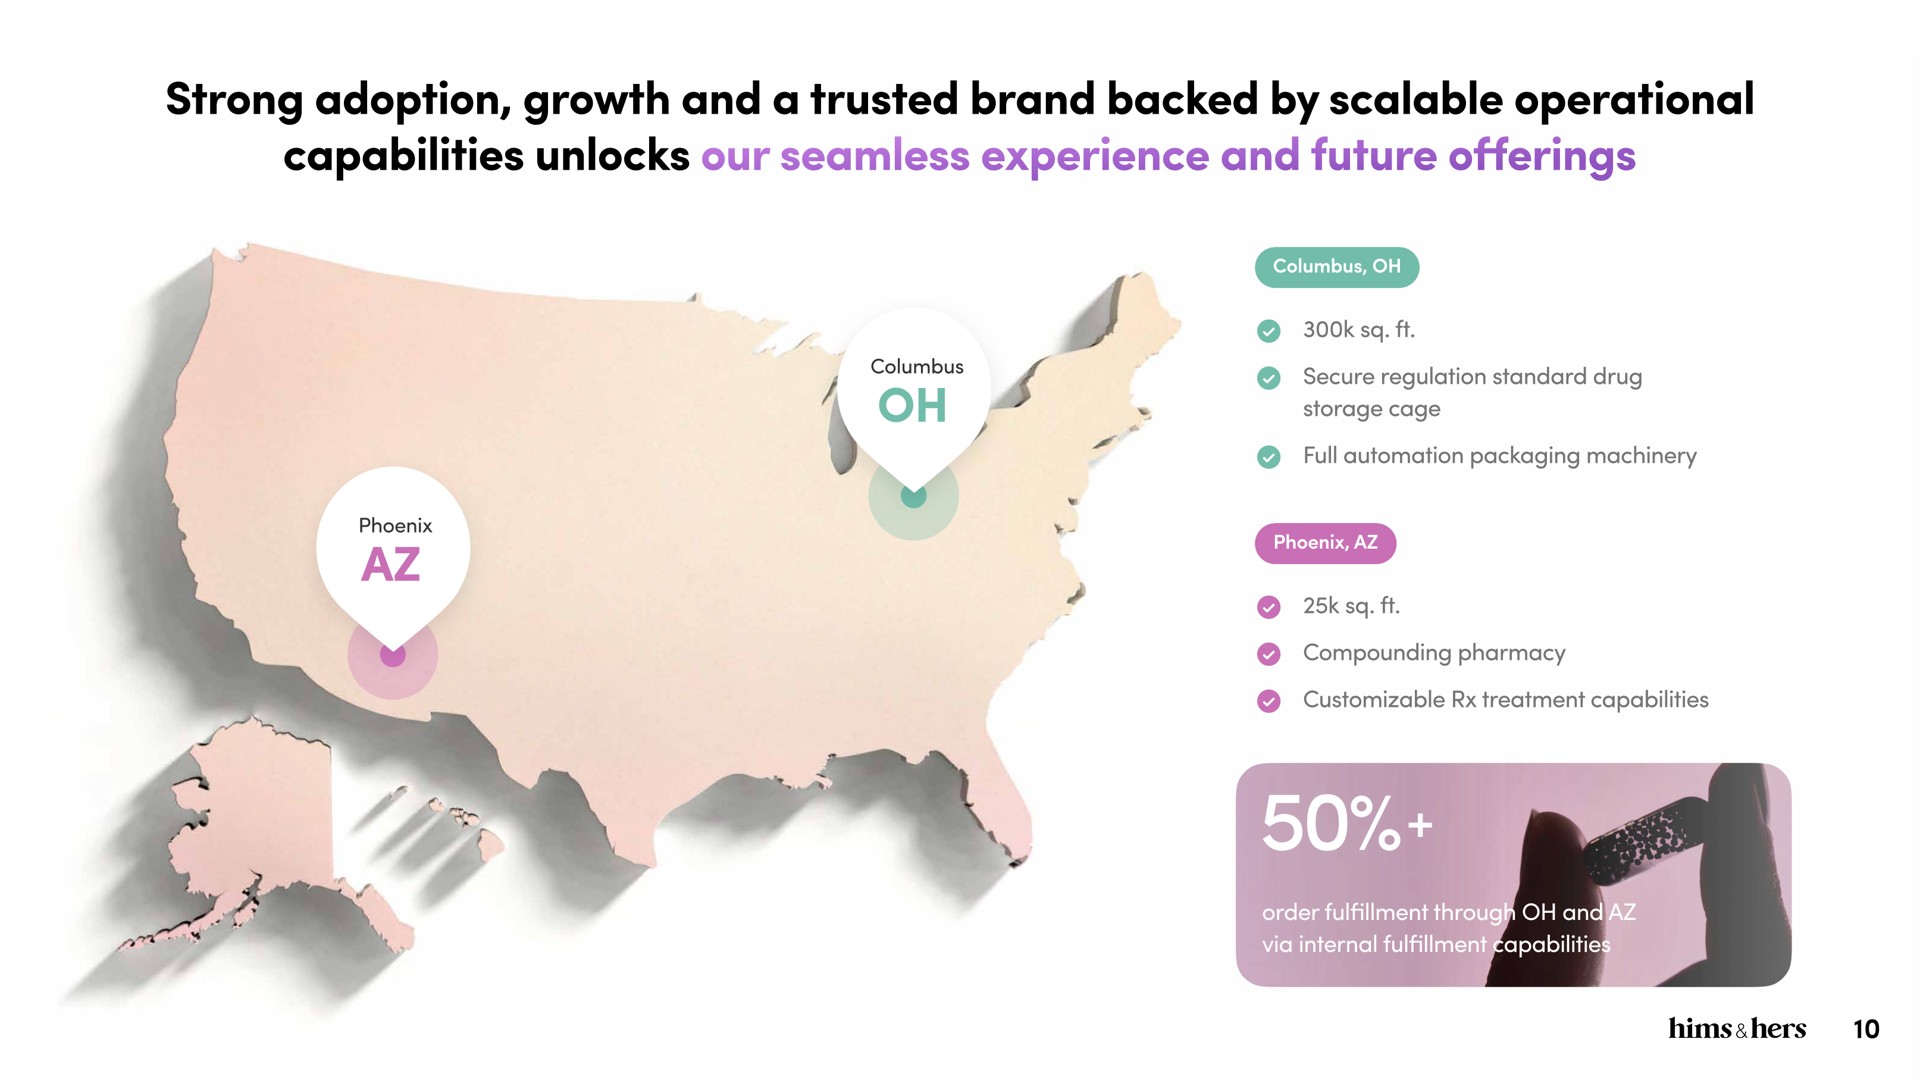 strong adoption growth and a trusted brand backed by scalable operational capabilities unlocks our seamless experience and future offerings | Hims & Hers